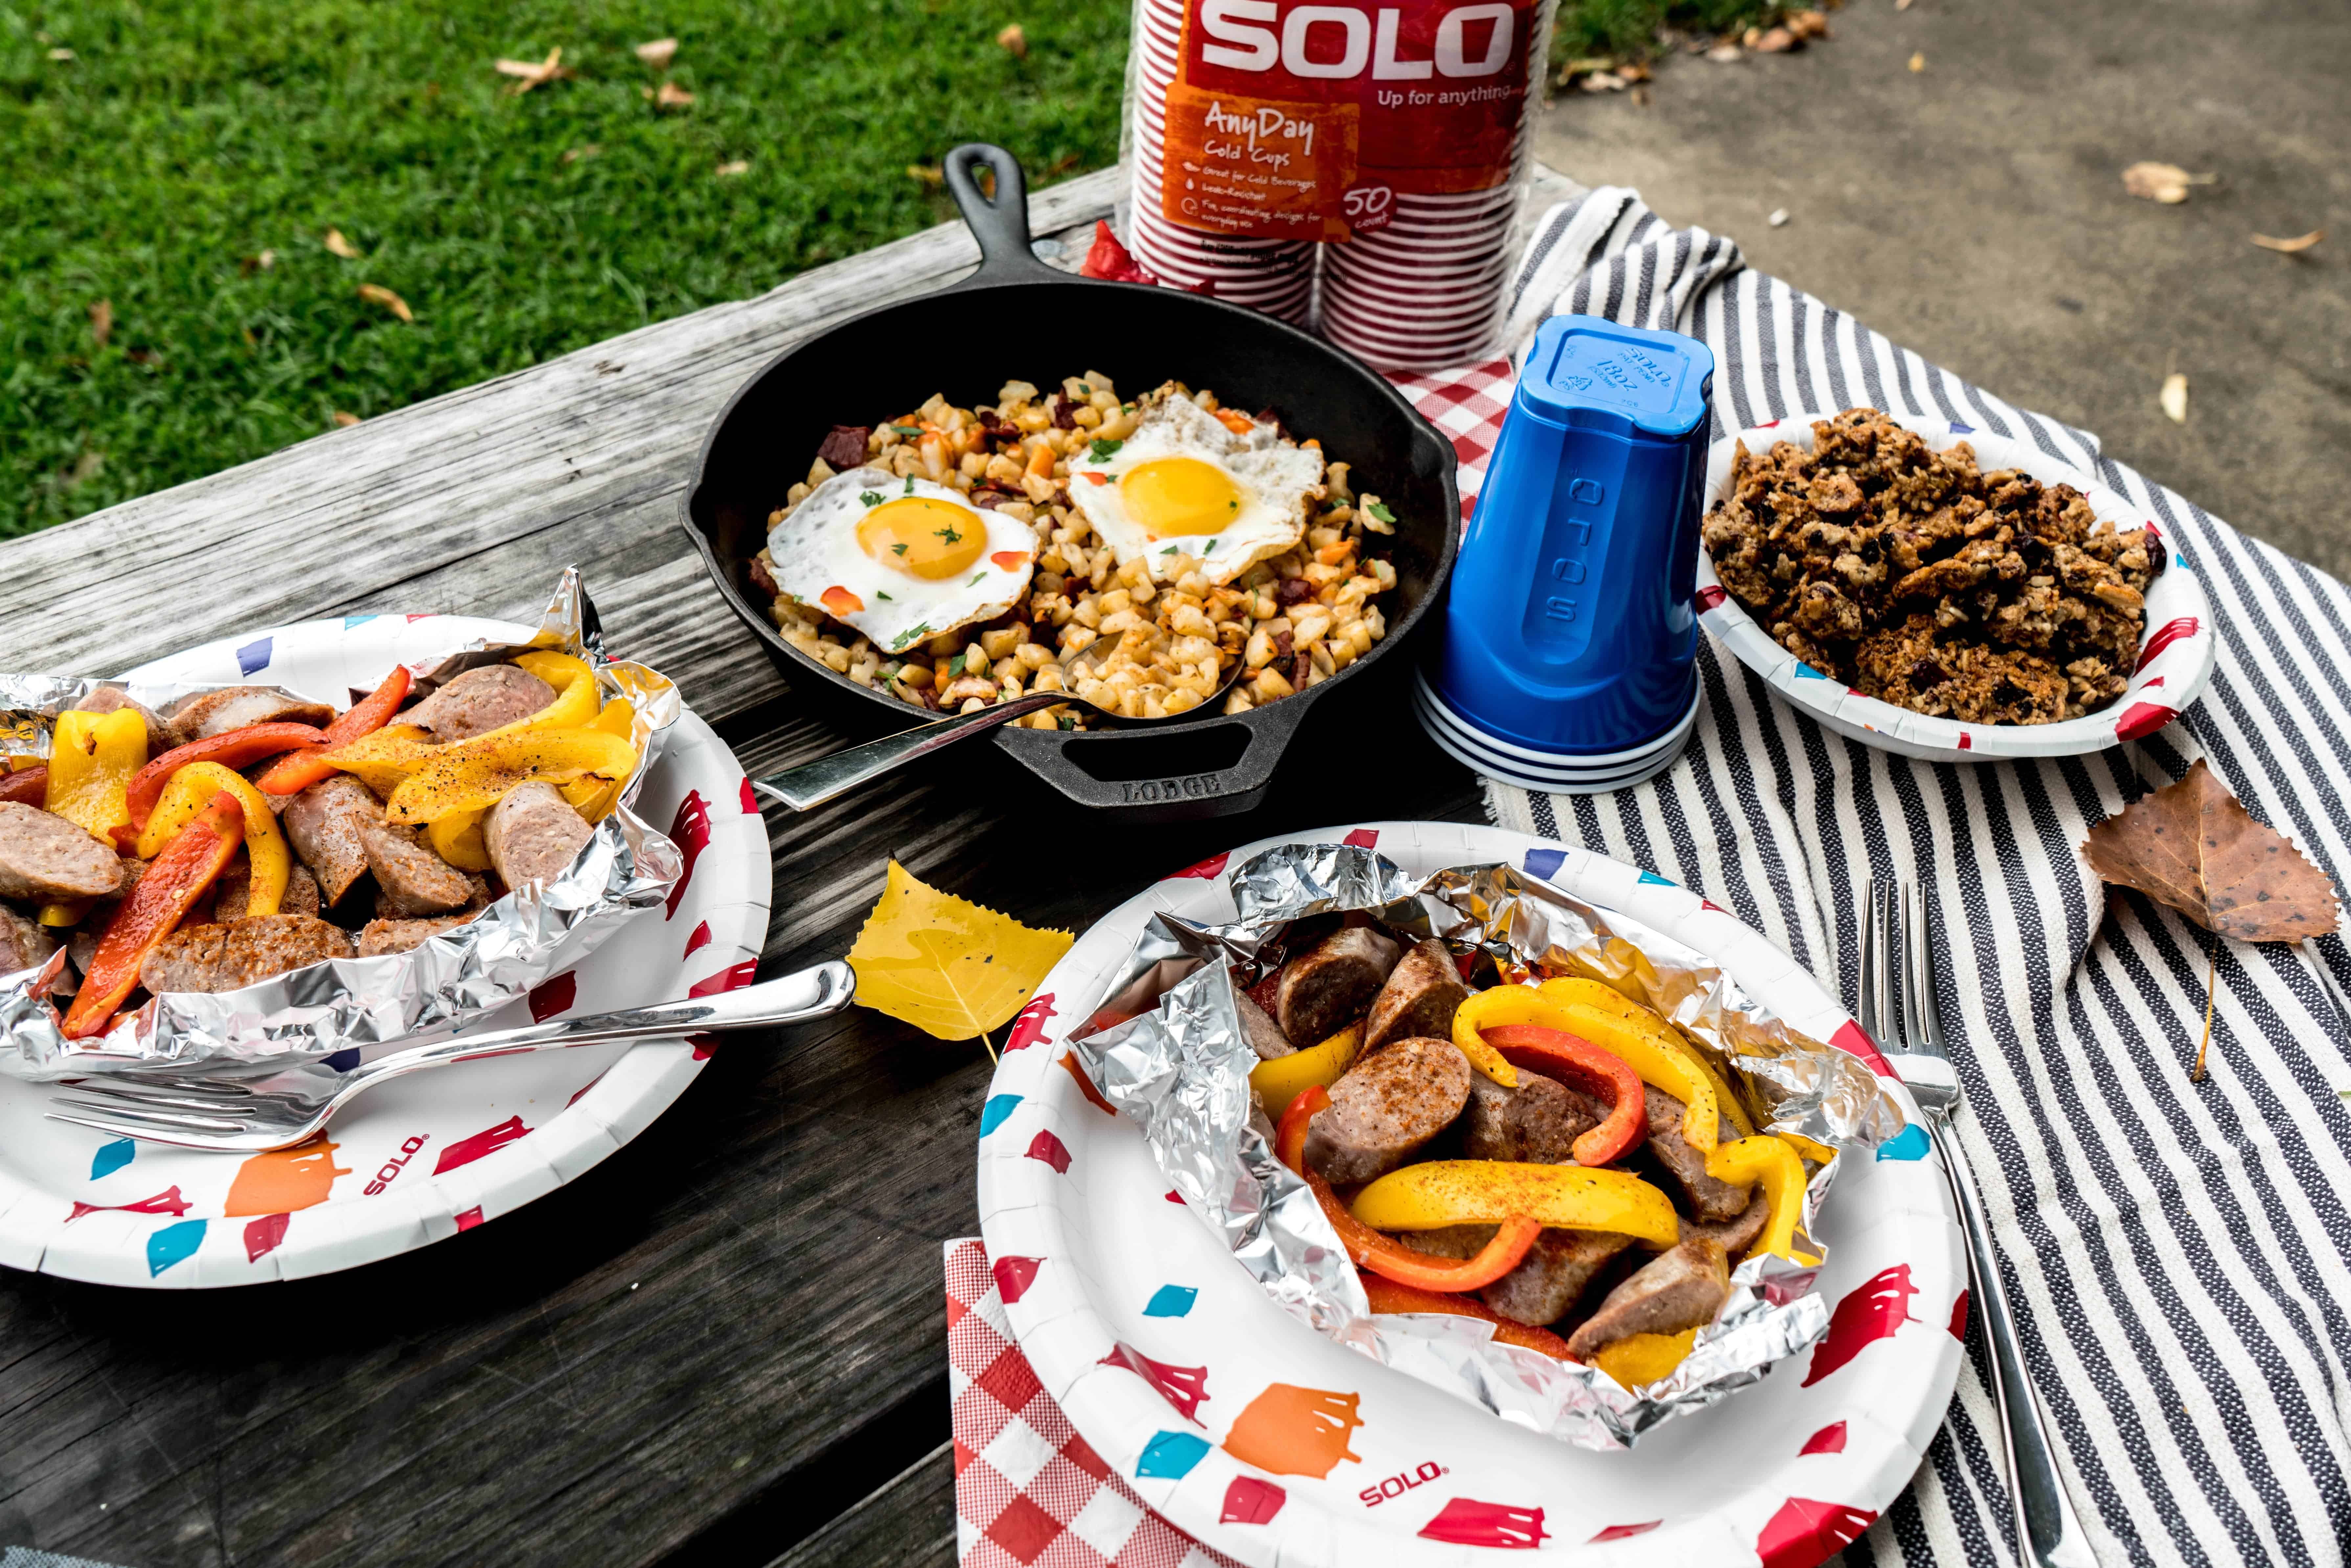 Camping recipes on picnic table